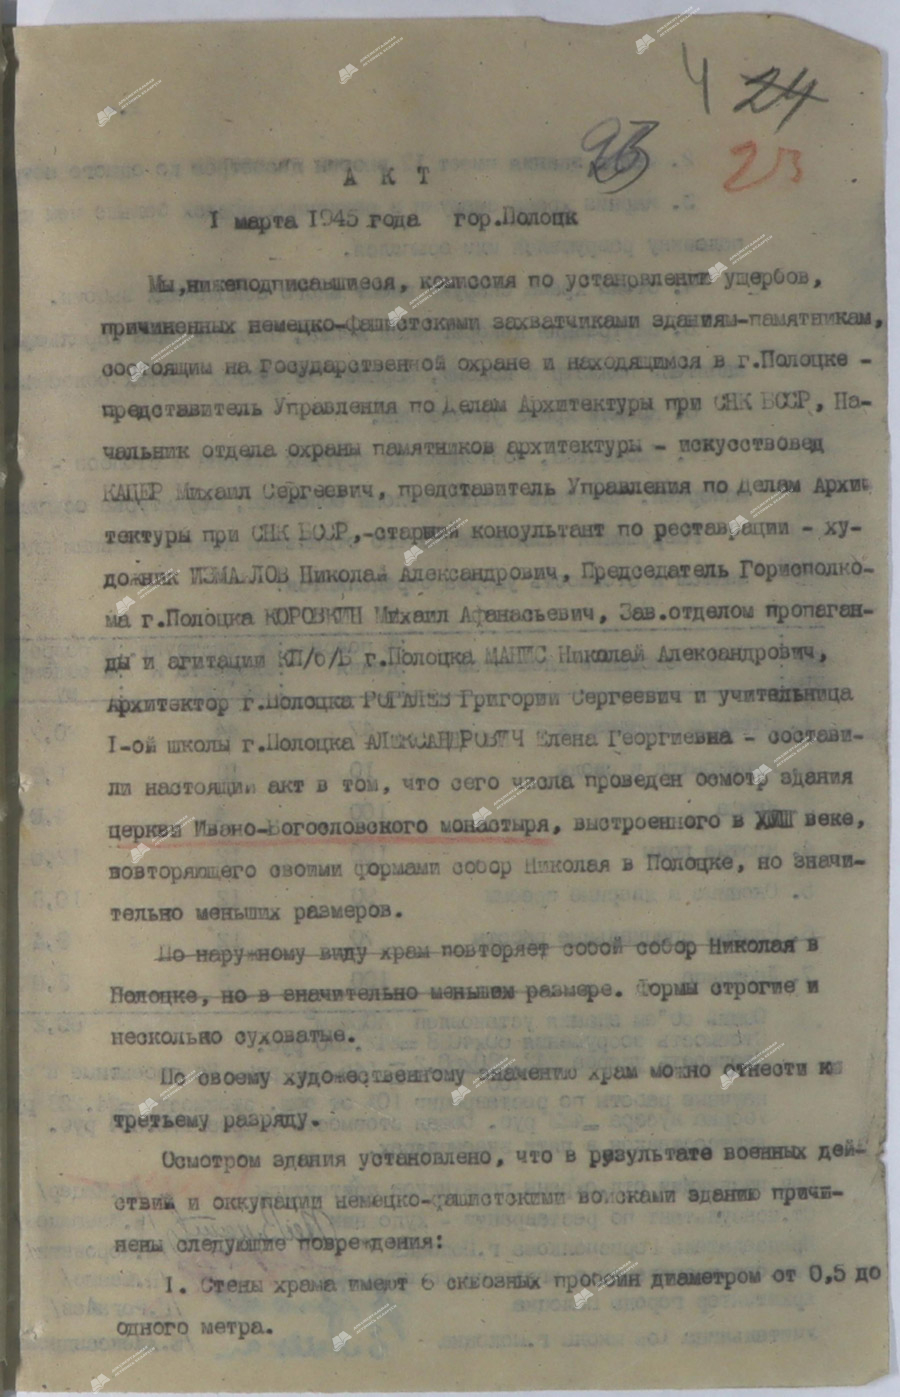 Acts of the commission of the Polotsk City Executive Committee to establish the damage caused by the Nazi invaders to the architectural monuments of Polotsk-стр. 5